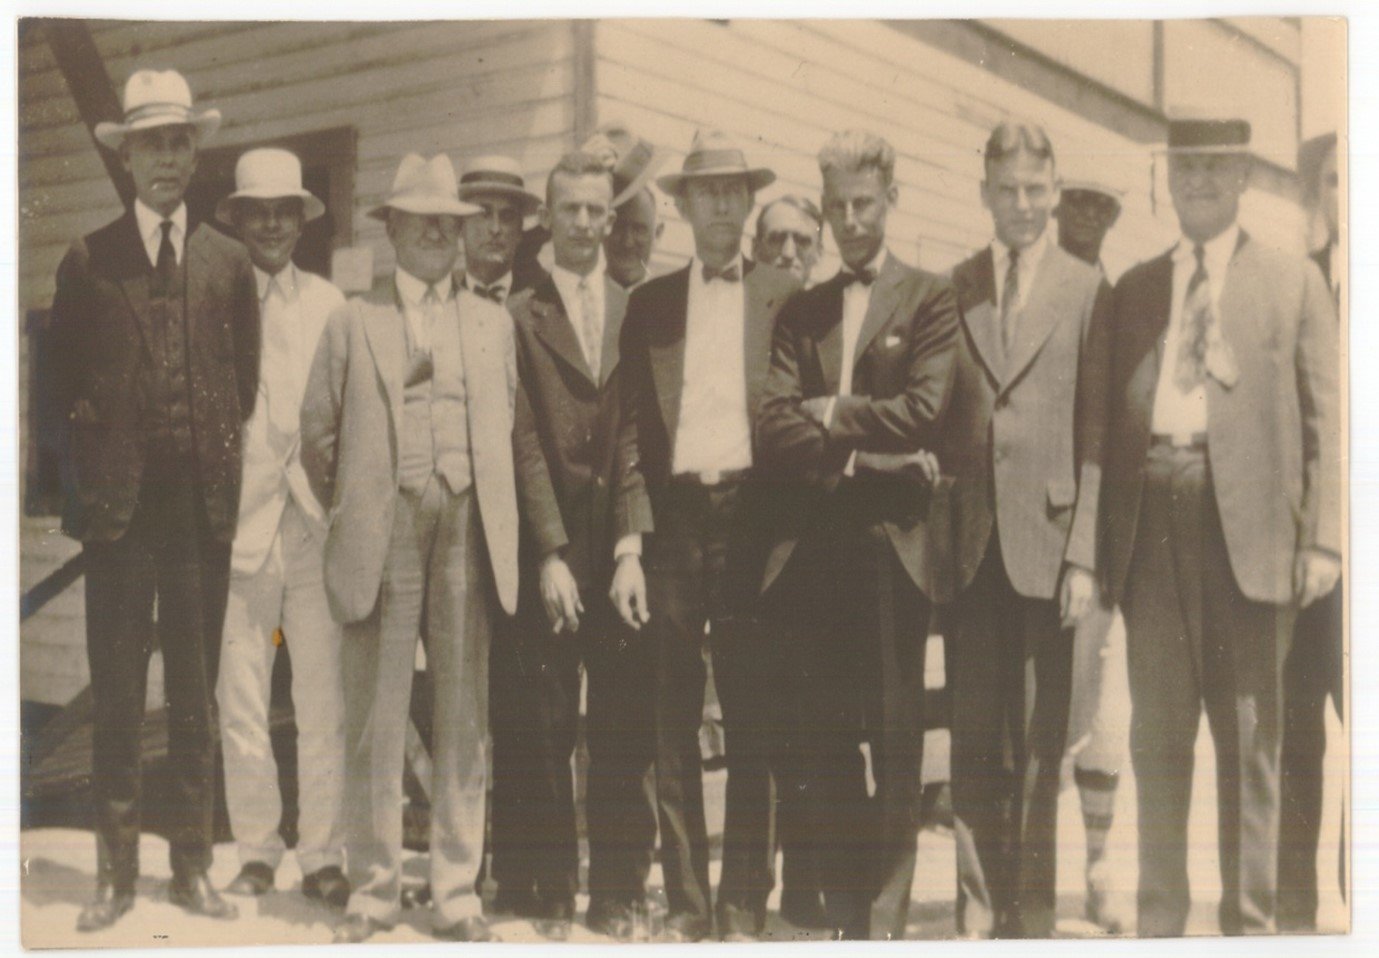 In front of the Watanabe Hotel (left to right) are Mr. Thomas, A. C. Clewis – Founder of Clewiston, E. L. Stewart – director/cashier, J. A. Griffin, C. C. Whitaker – Early Stockholder, C. V. Parkinson – director/president, Bill Lee, John Sam Cottrell – director/vice president, E. C. Cole – Clewiston Company (owned real estate of Clewiston), Dick Griffin – Exchange Bank of Tampa, Ike Kraft – brother-in-law of A. C. Clewis, Peter O. Knight – early stockholder Chief Woodward – Tampa law enforcement officer. [Photo courtesy First Bank]